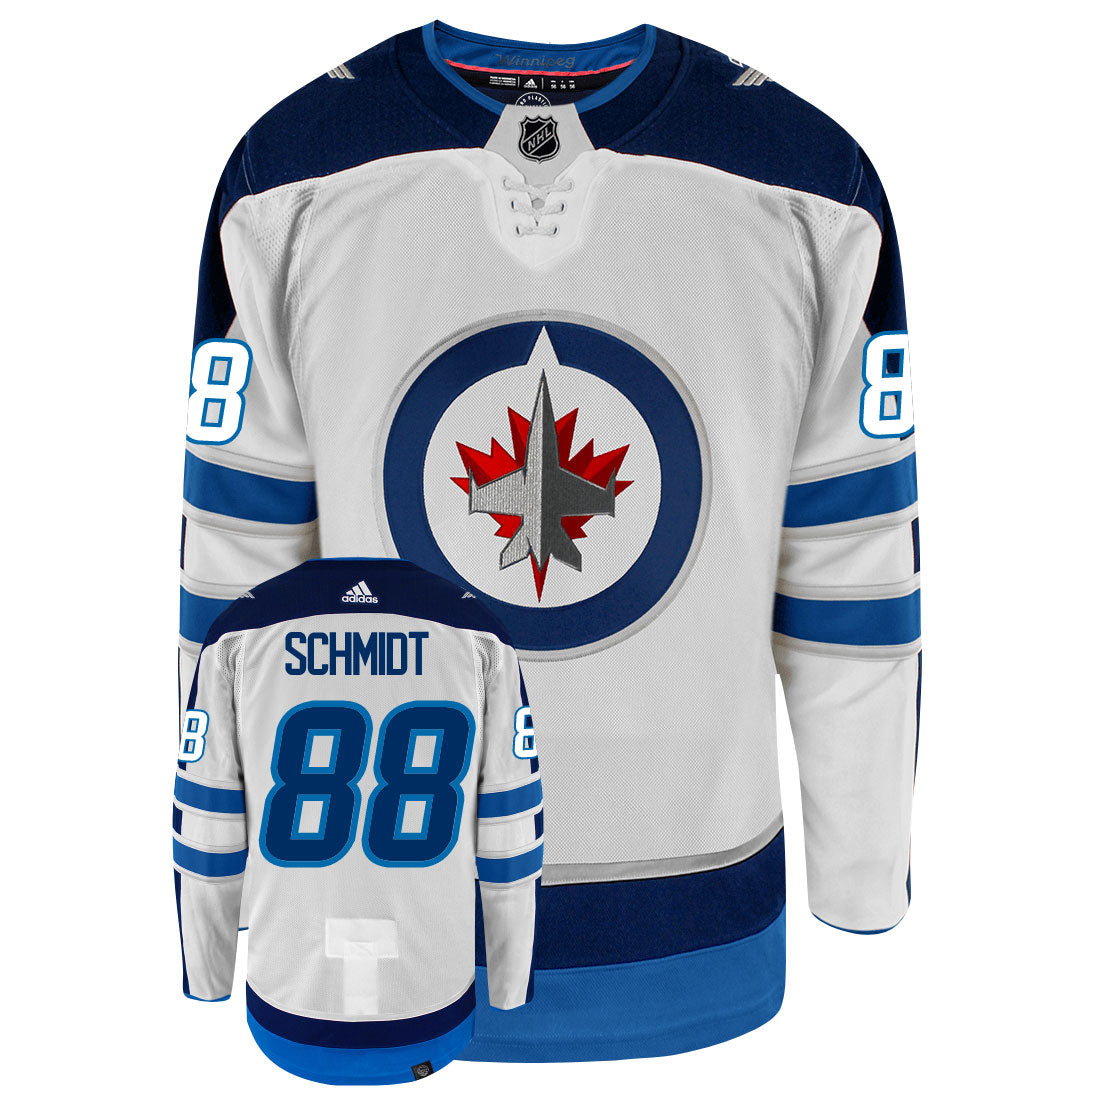 Nate Schmidt Winnipeg Jets Adidas Primegreen Authentic Away NHL Hockey Jersey - Front/Back View